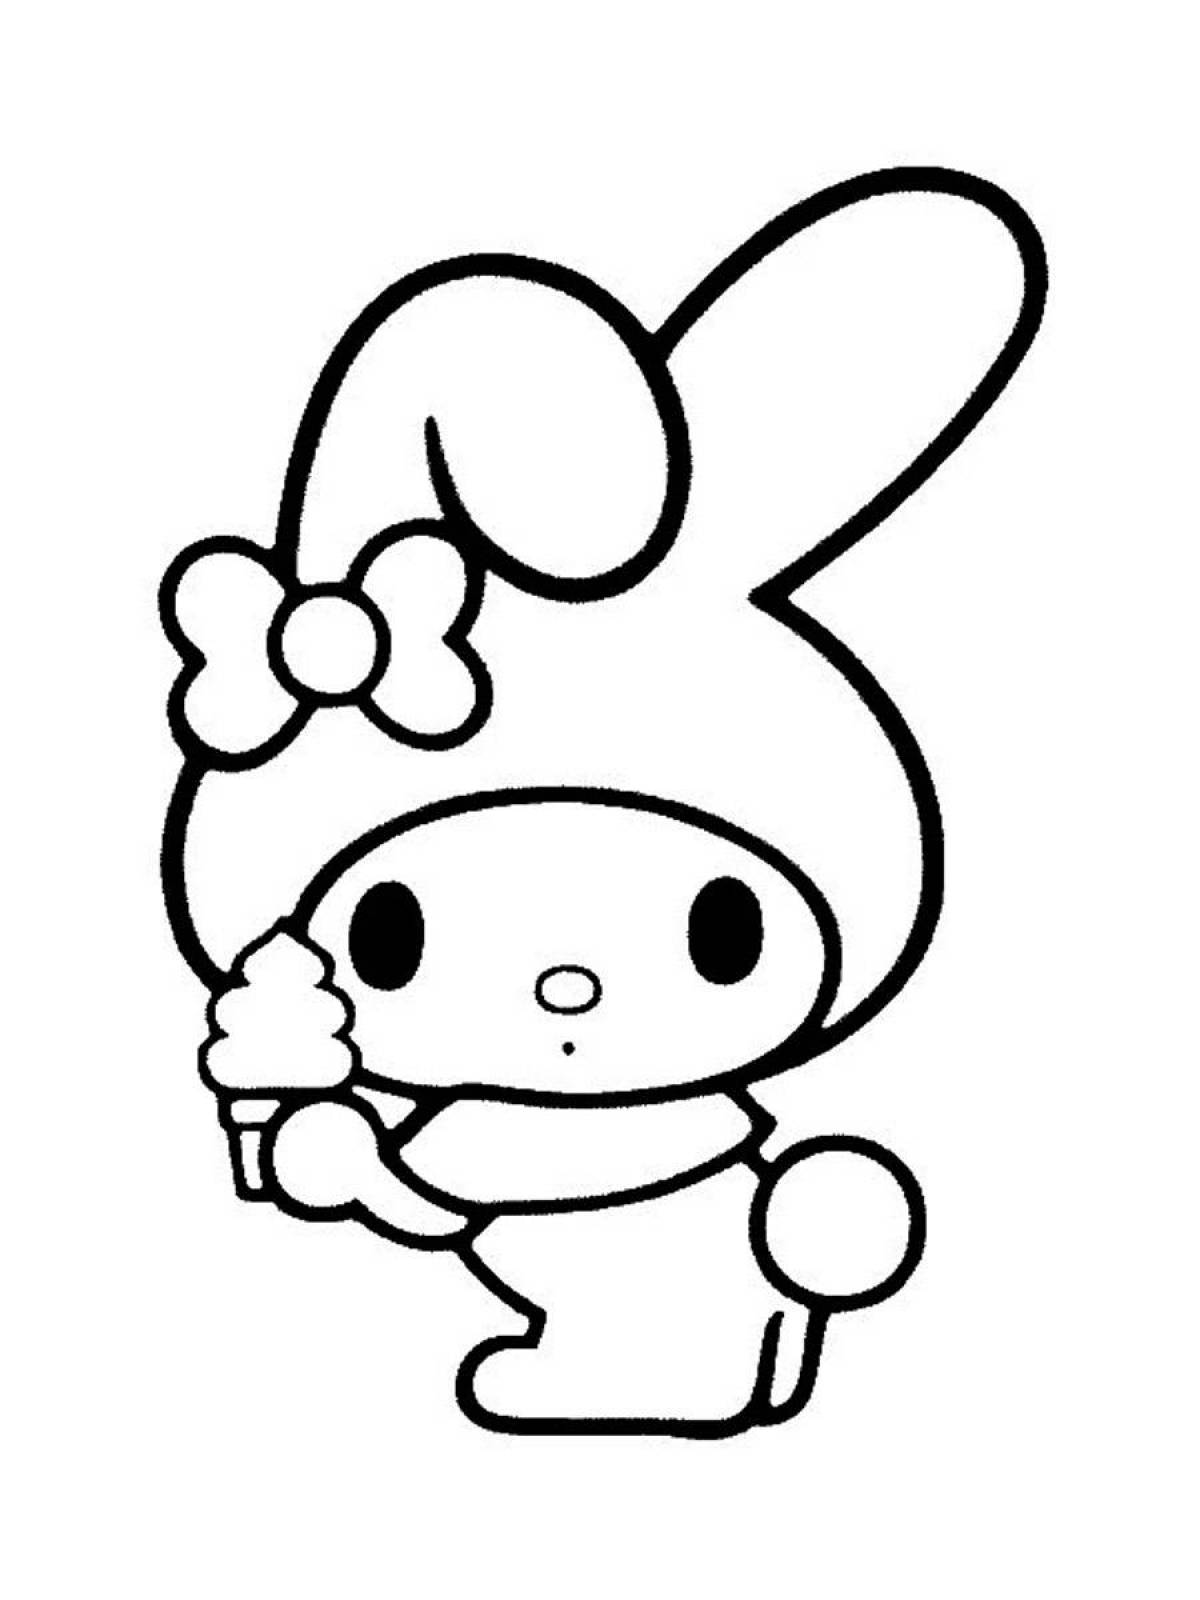 Fairy kuromi coloring page